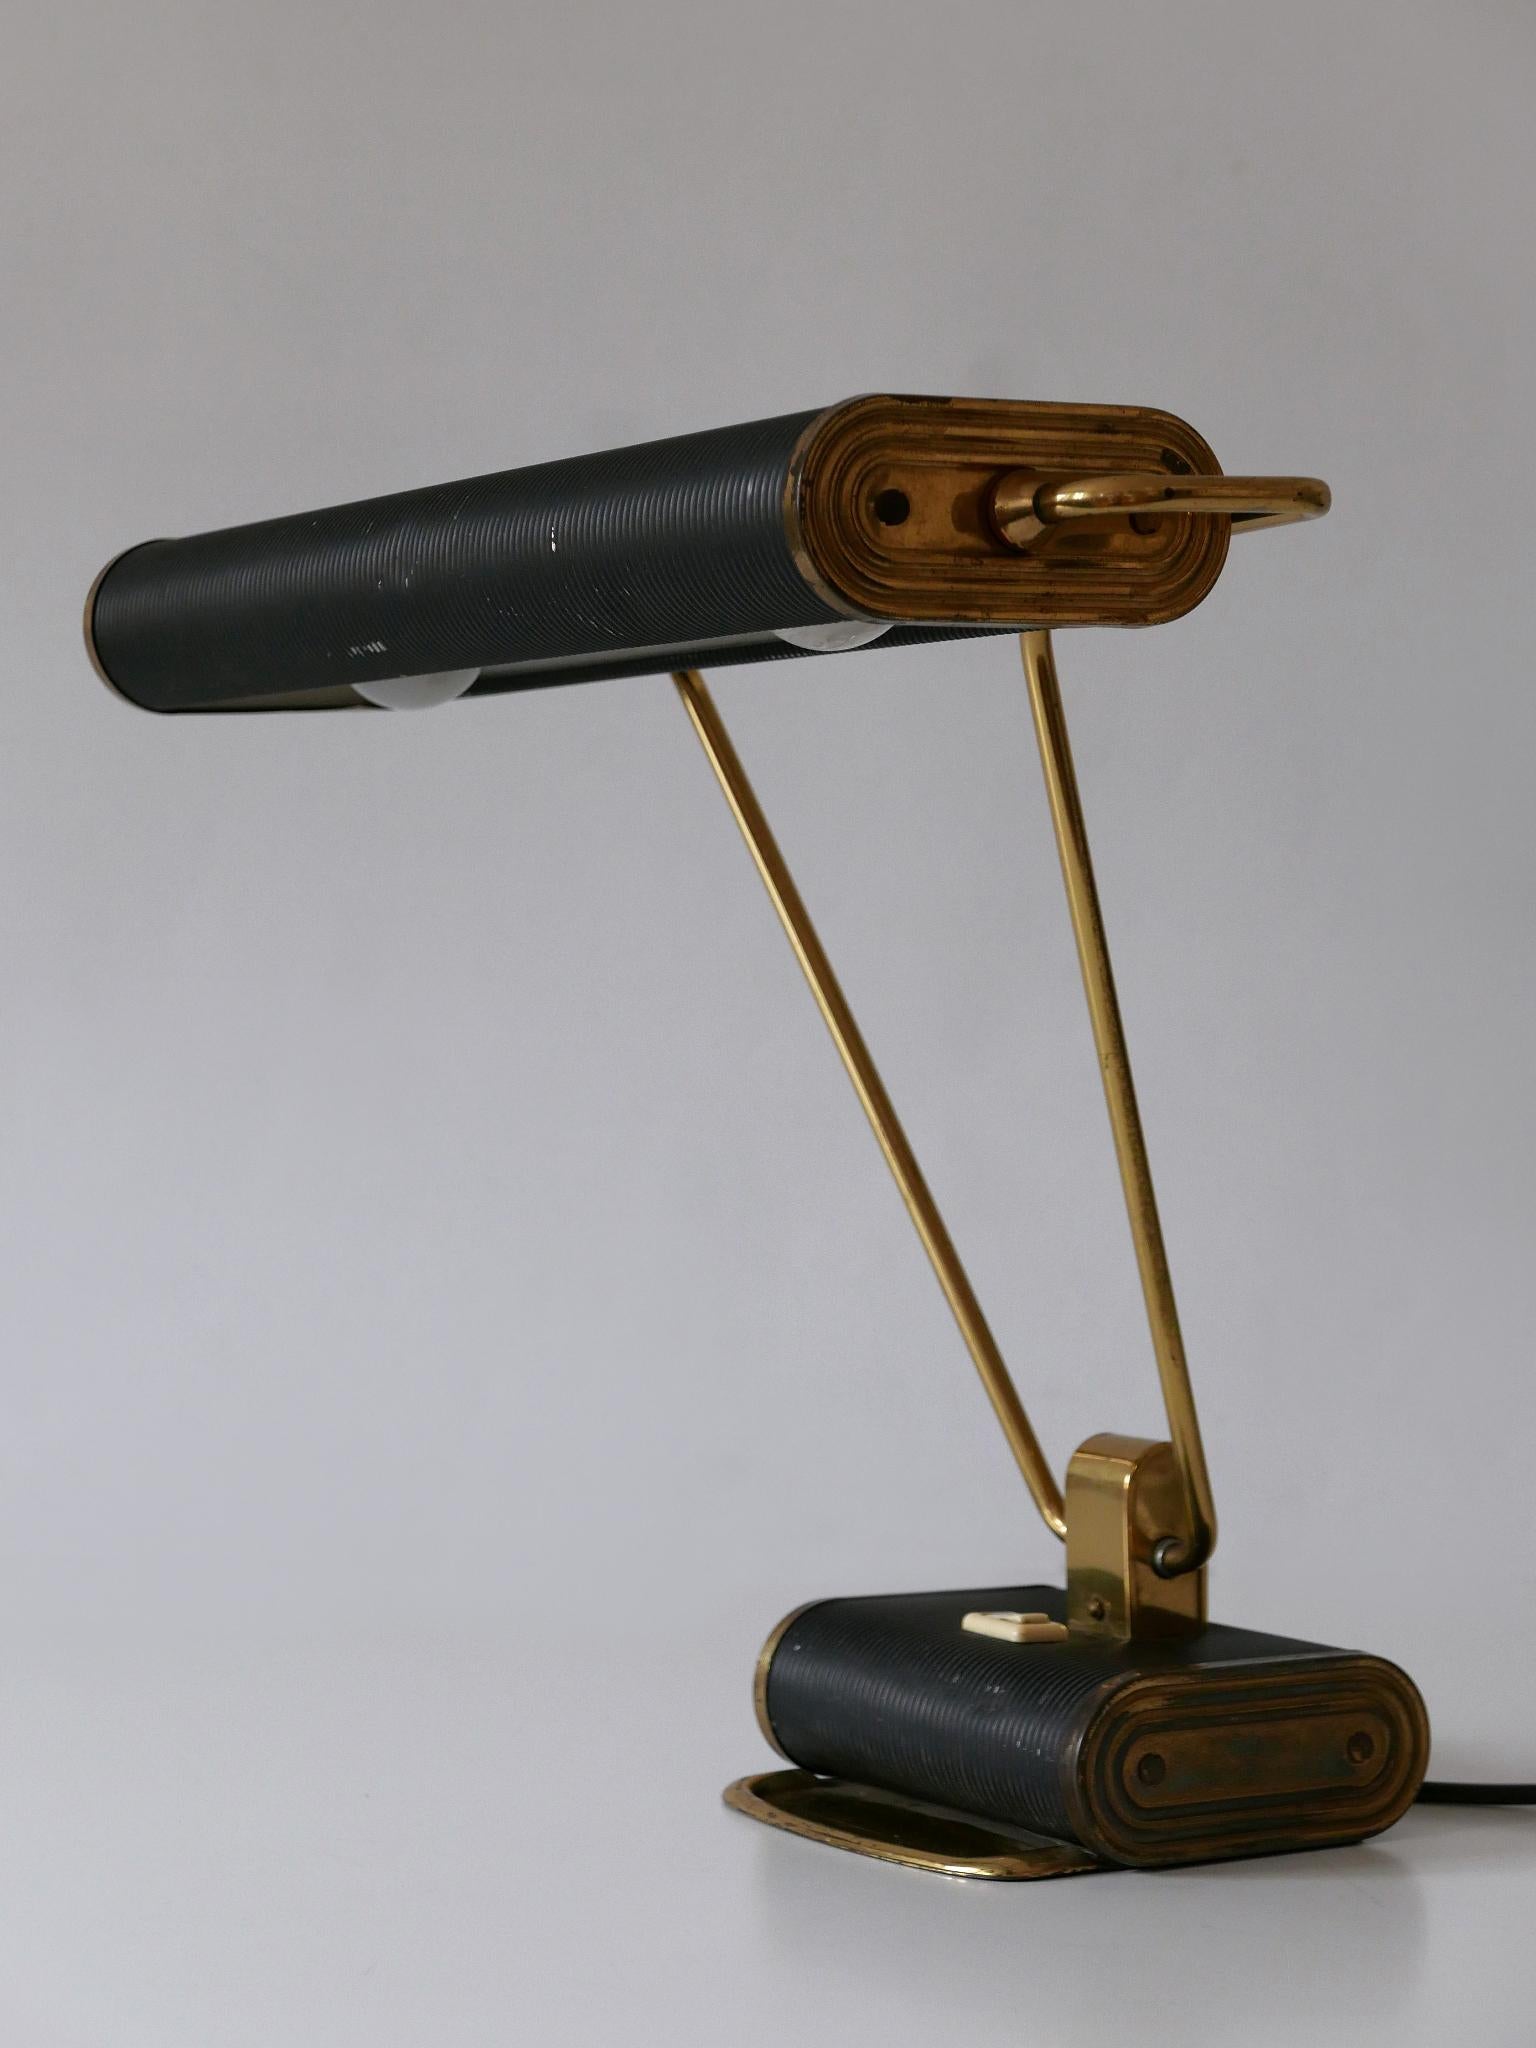 Art Deco Table Lamp or Desk Light 'No 71' by André Mounique for Jumo 1930s For Sale 3